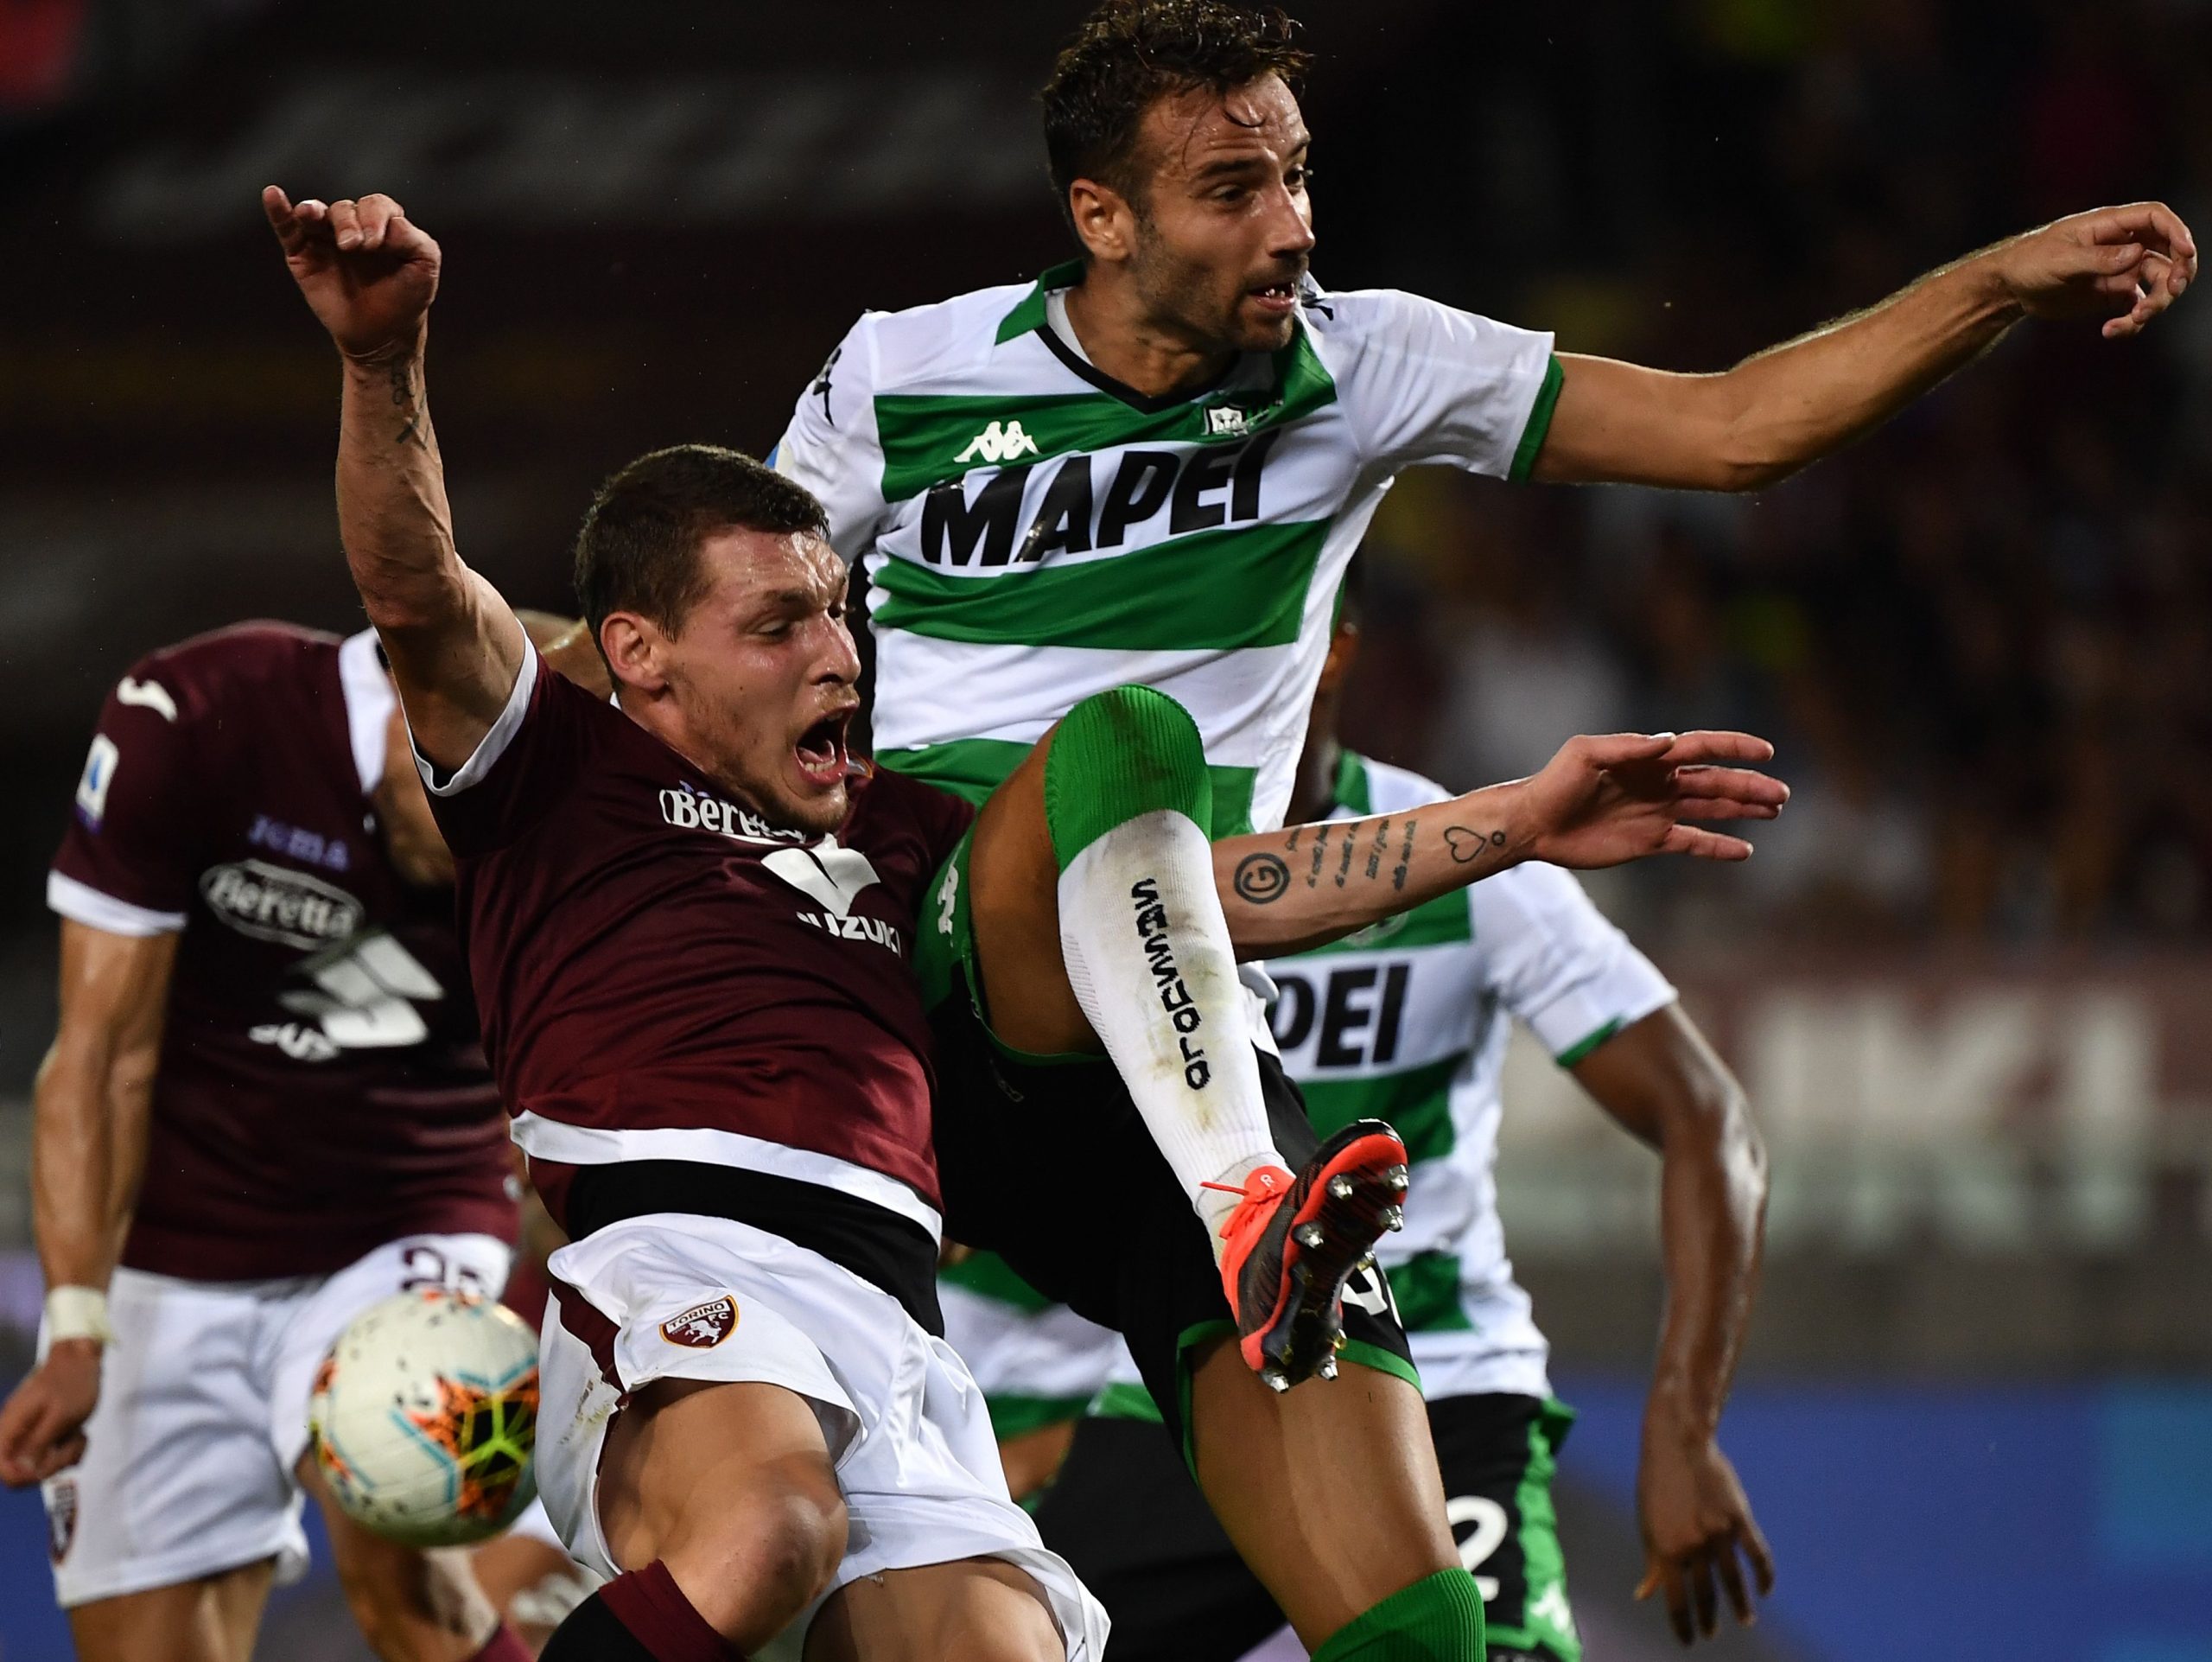 Newcastle United are in race to land Andrea Belotti who is in action in the photo